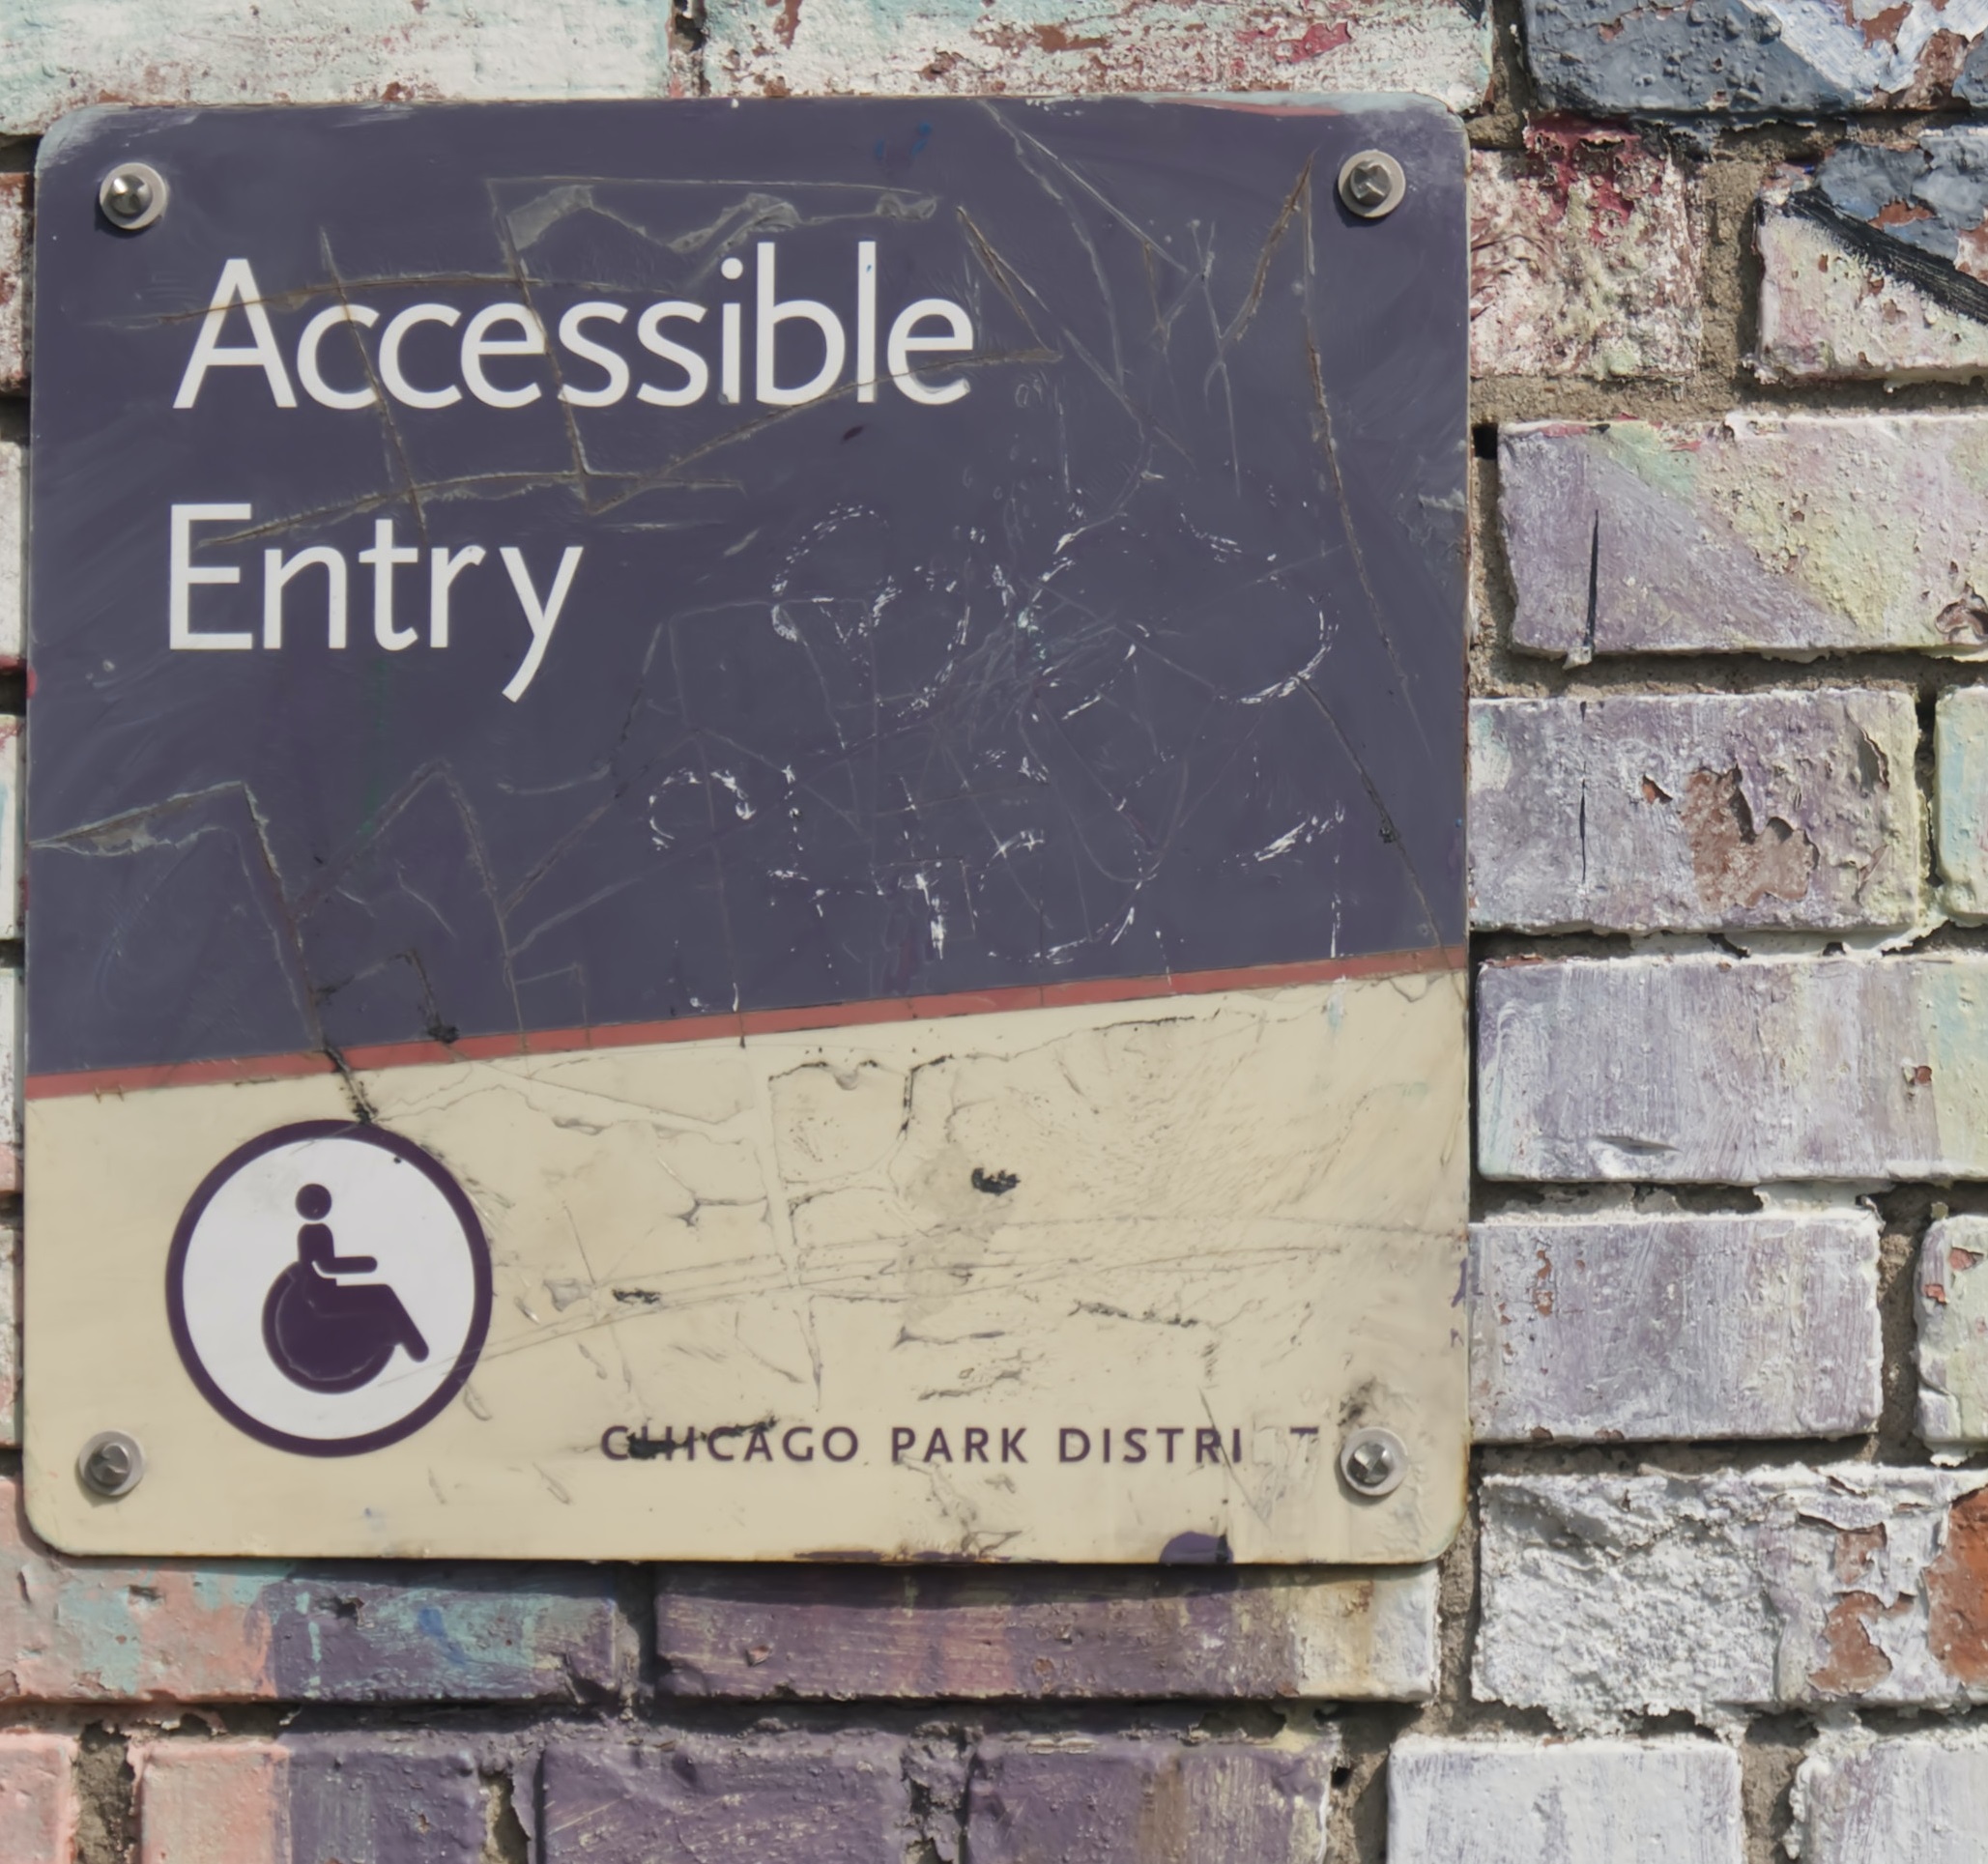 An Image of an accessible entry sign. 